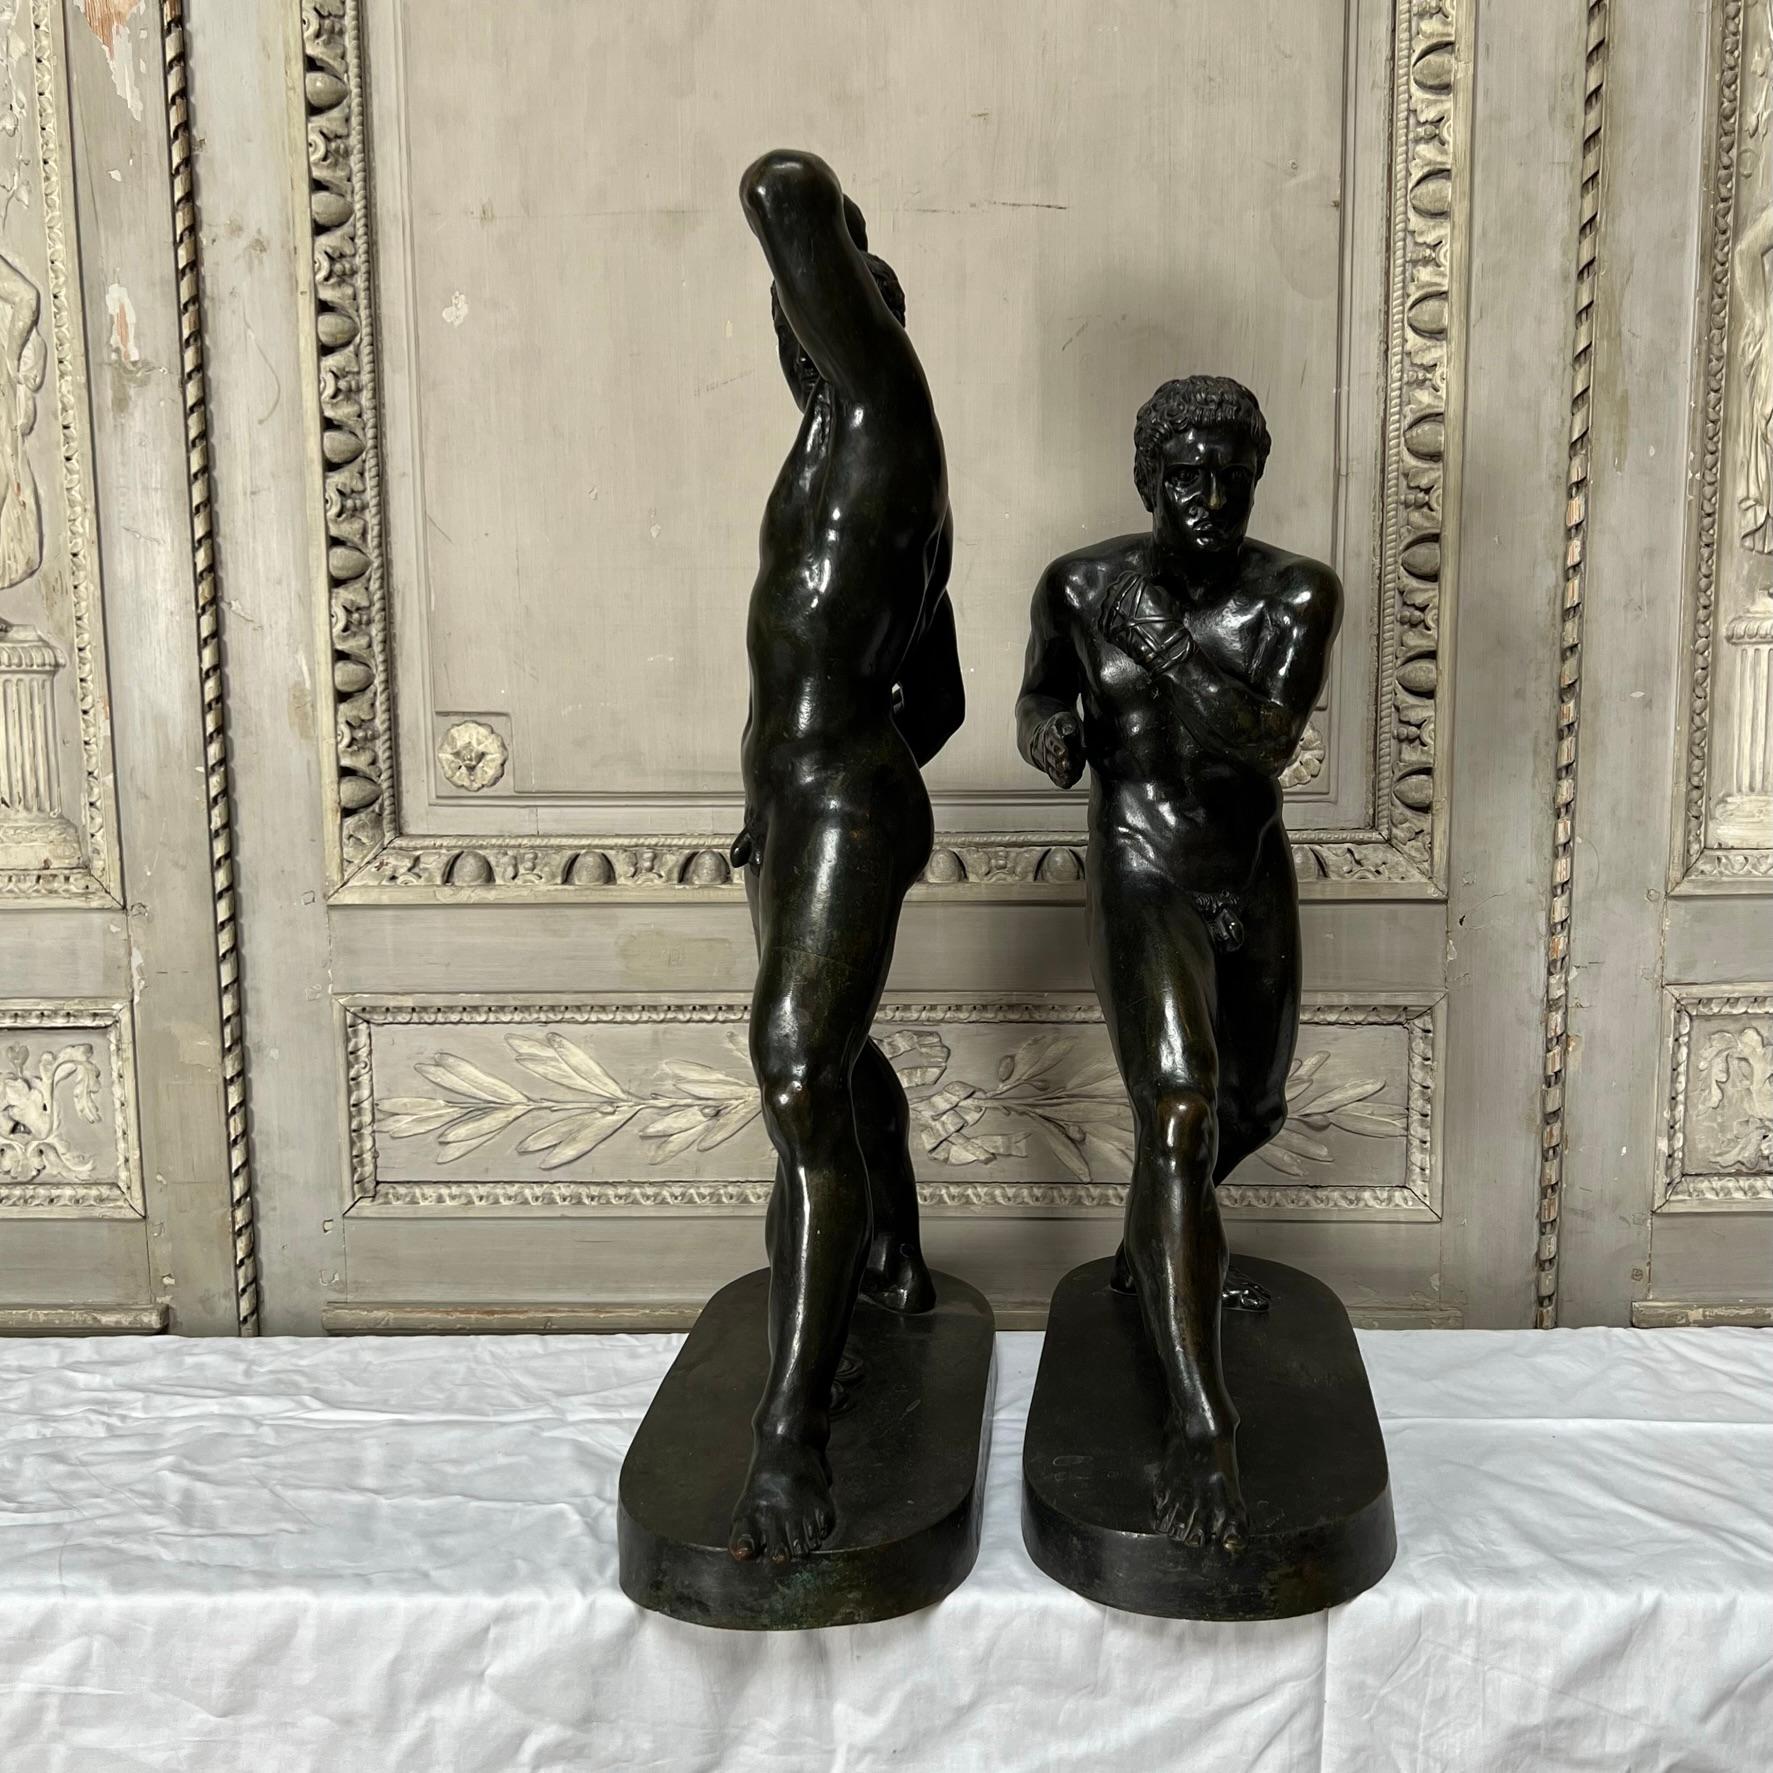  Large Pair of 19th Century Italian Bronzes of Creugas and Demoxenos  In Good Condition For Sale In Dallas, TX